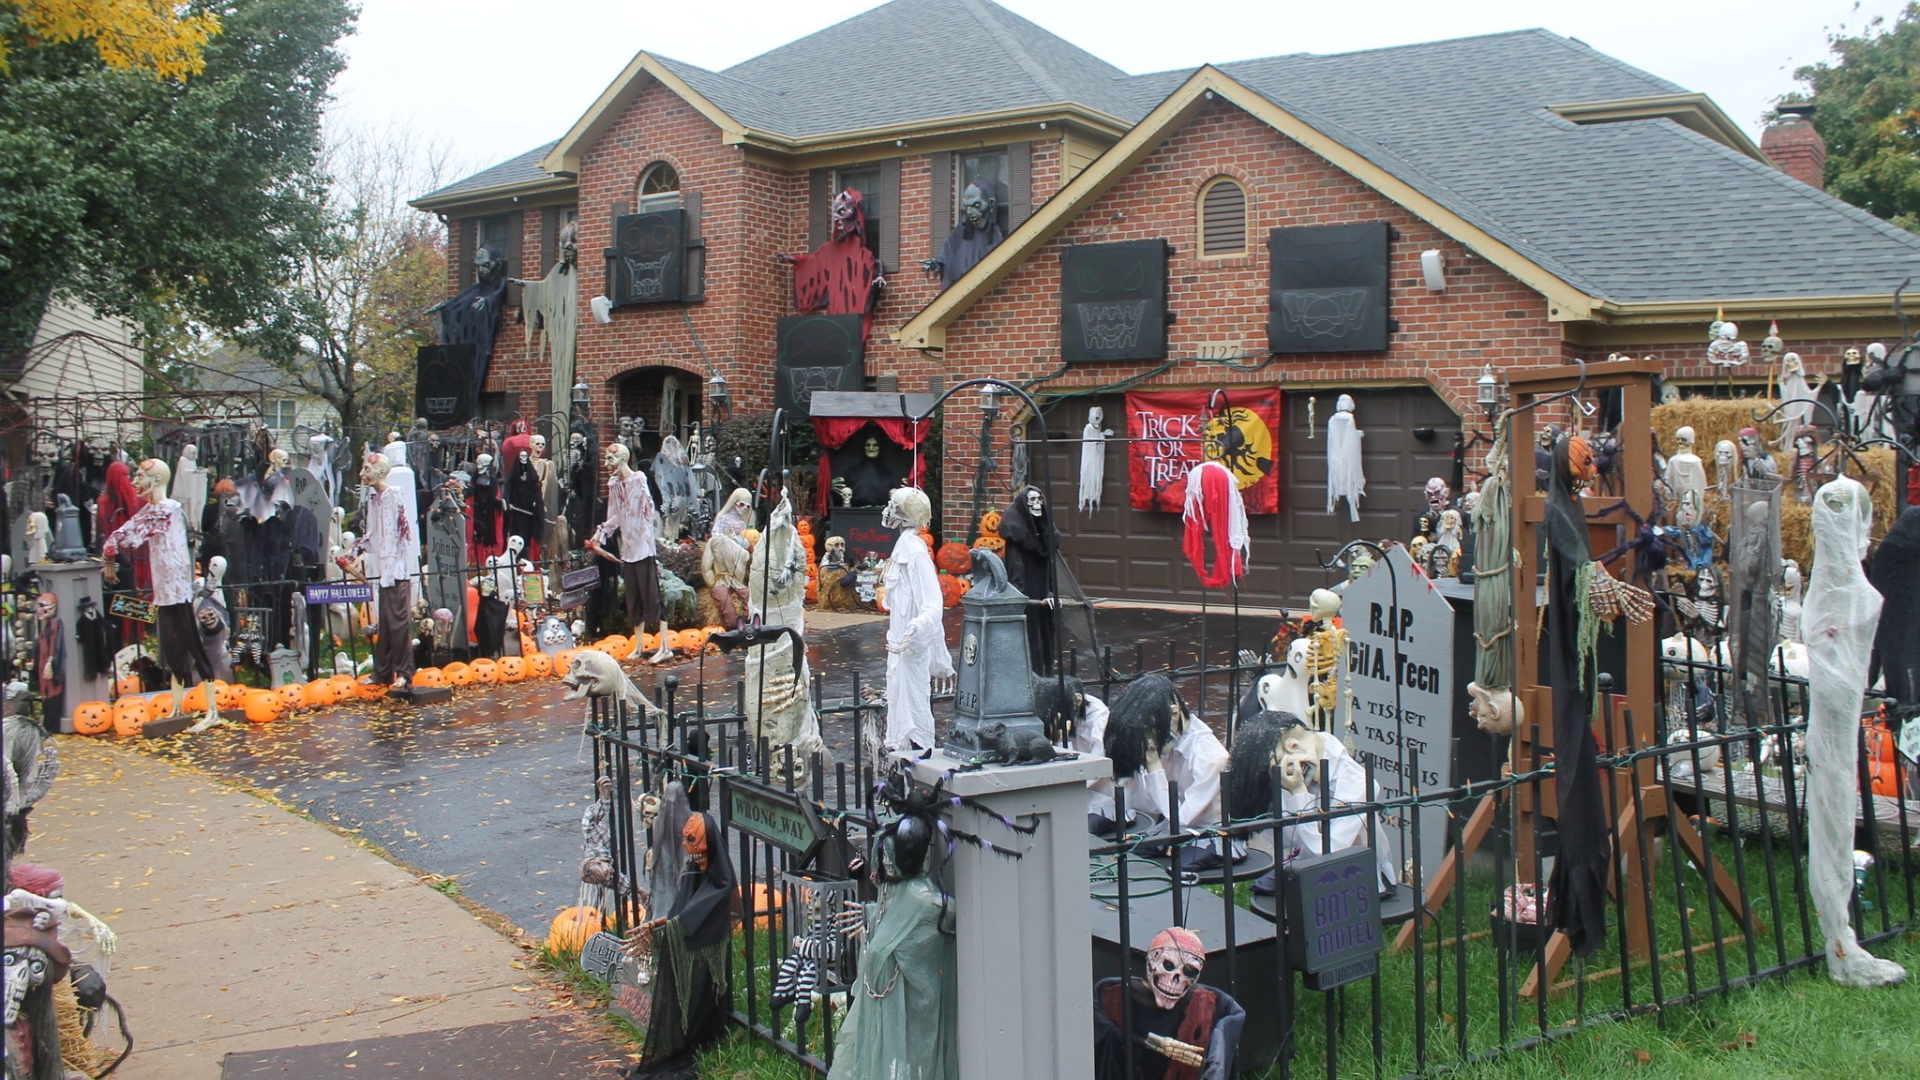 Naperville Halloween house becomes YouTube sensation